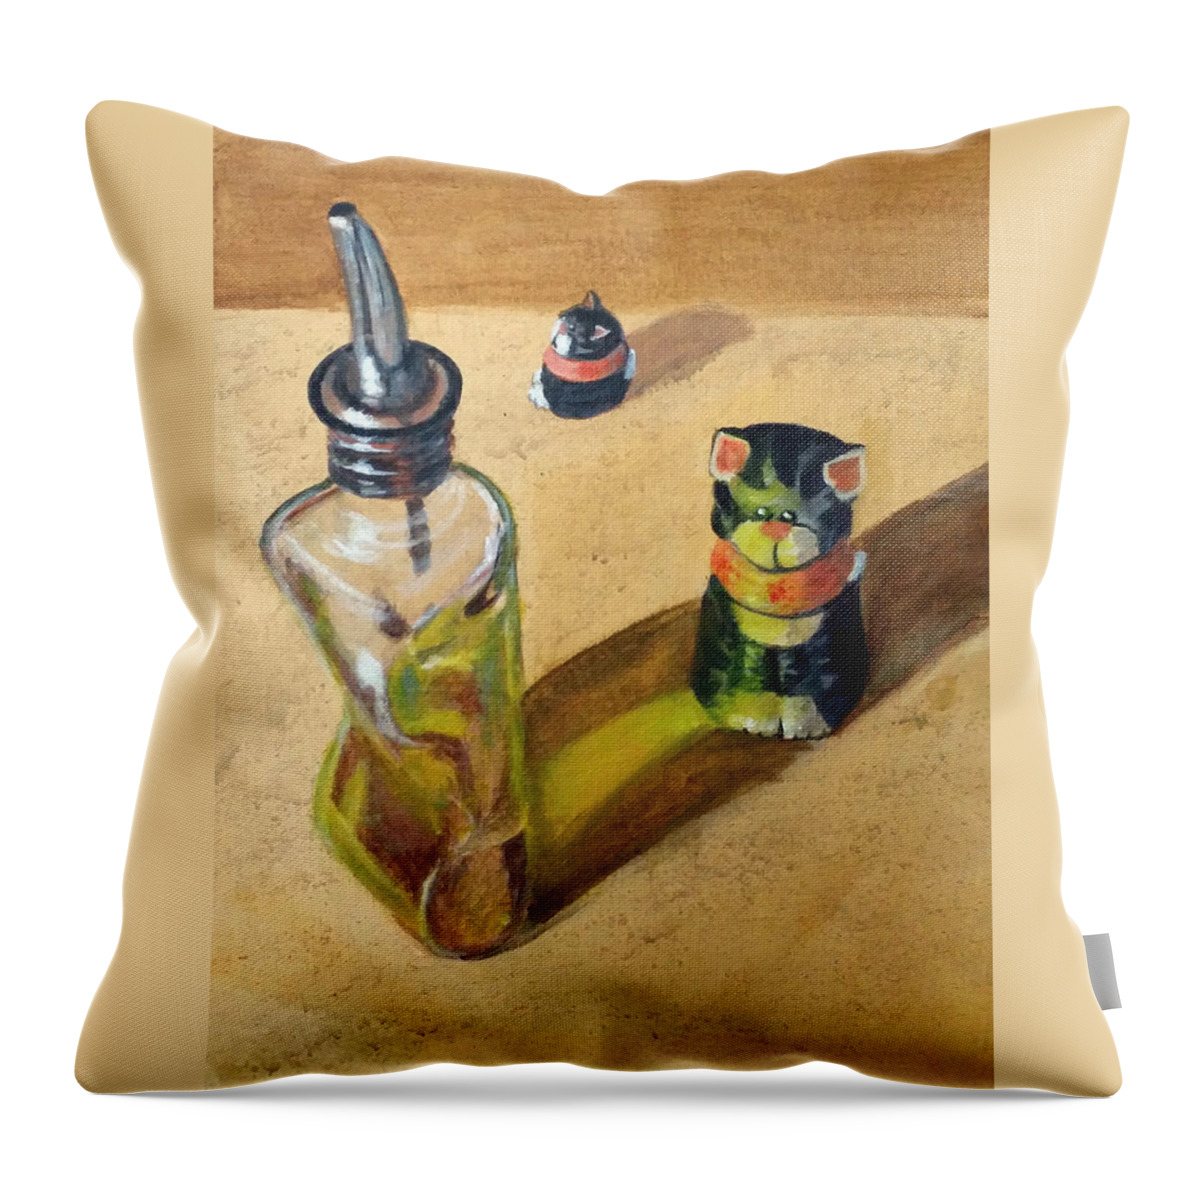 Olive Oil Throw Pillow featuring the painting In The Glow by Barbara J Blaisdell